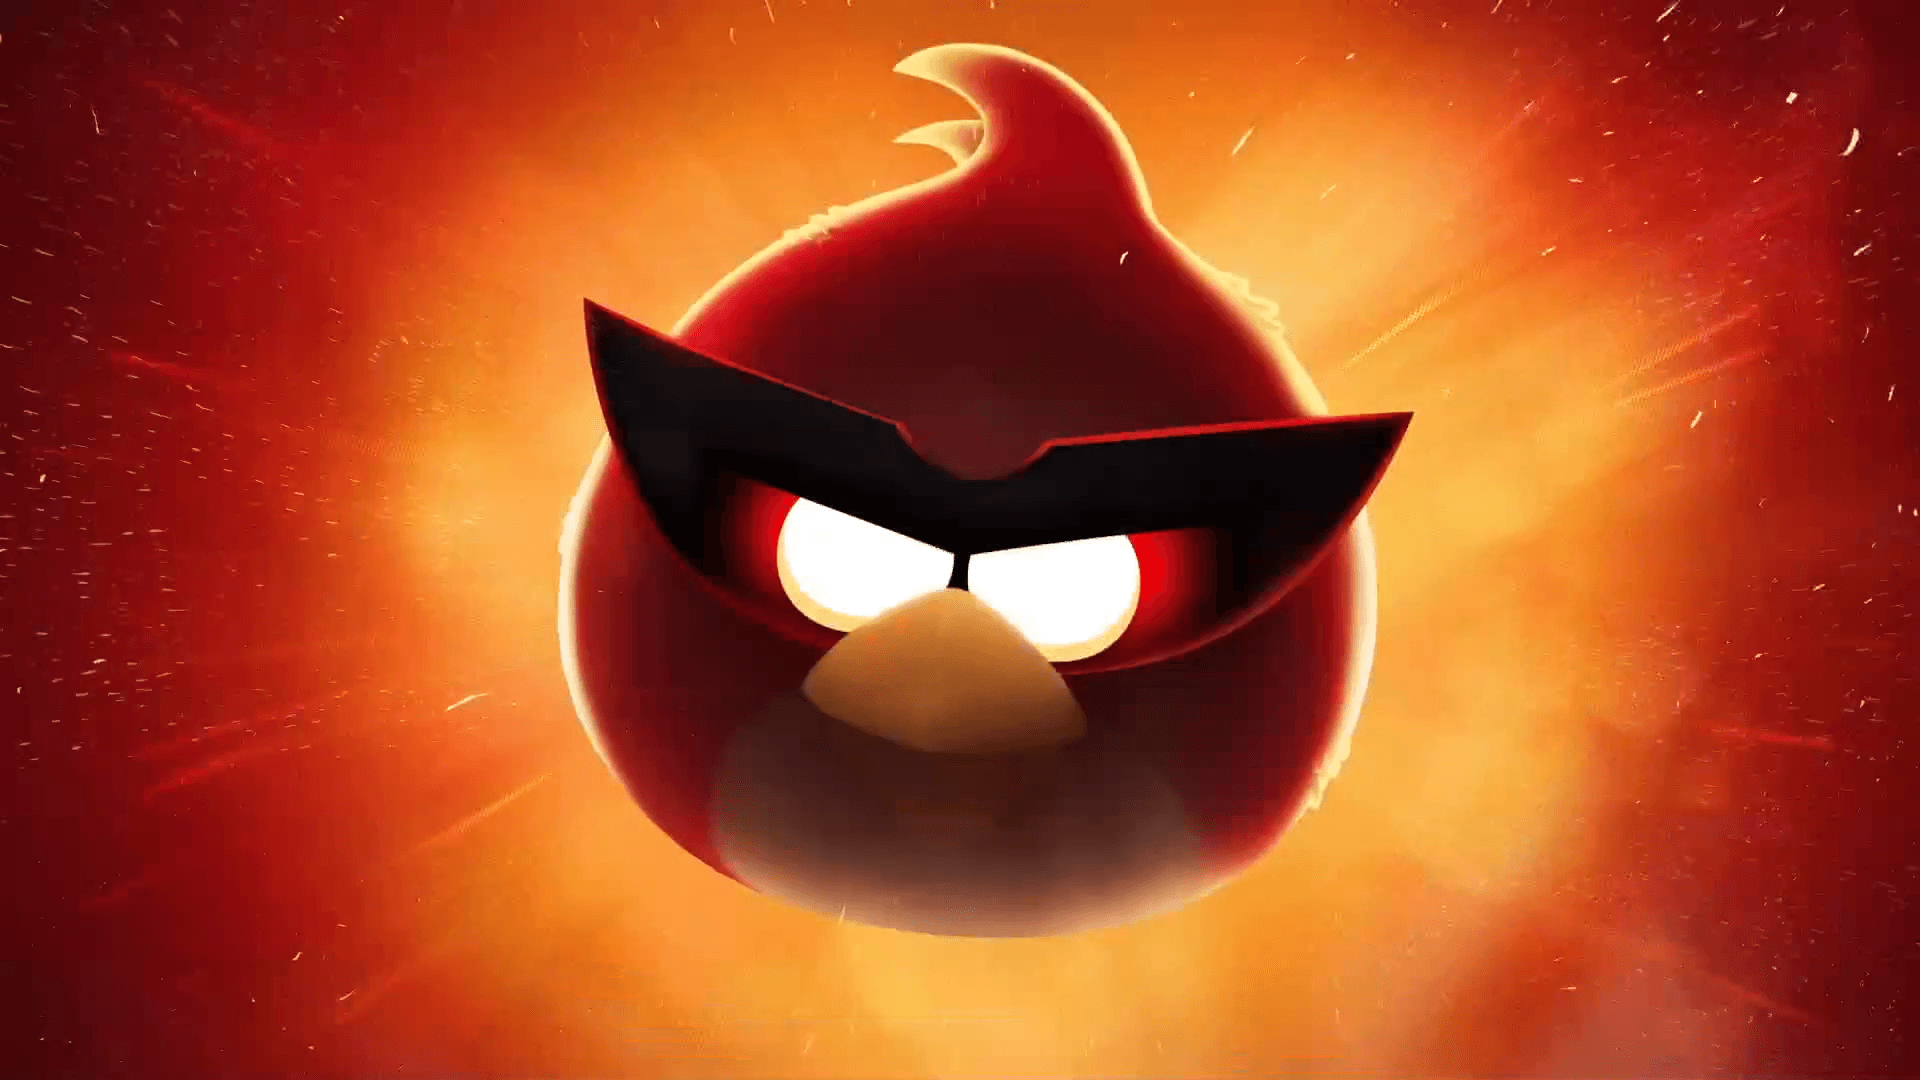 HD Wallpaper Of Angry Birds